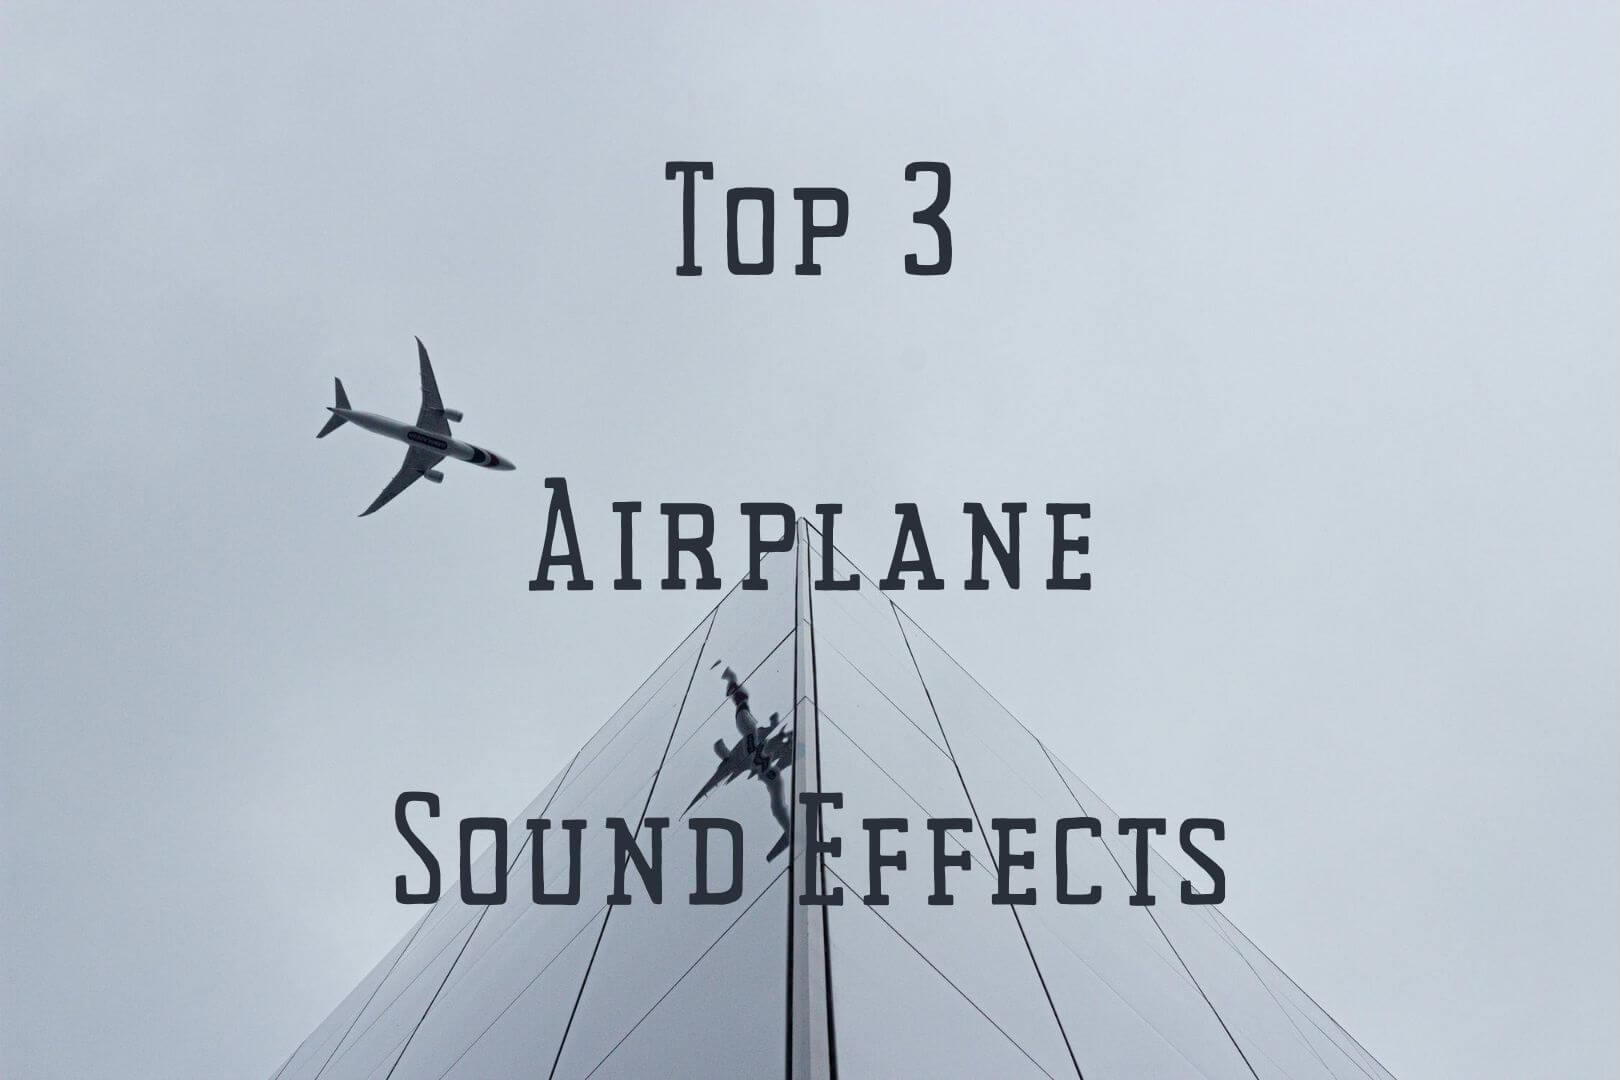 6 Best Download Resources for Airplane Sound Effect